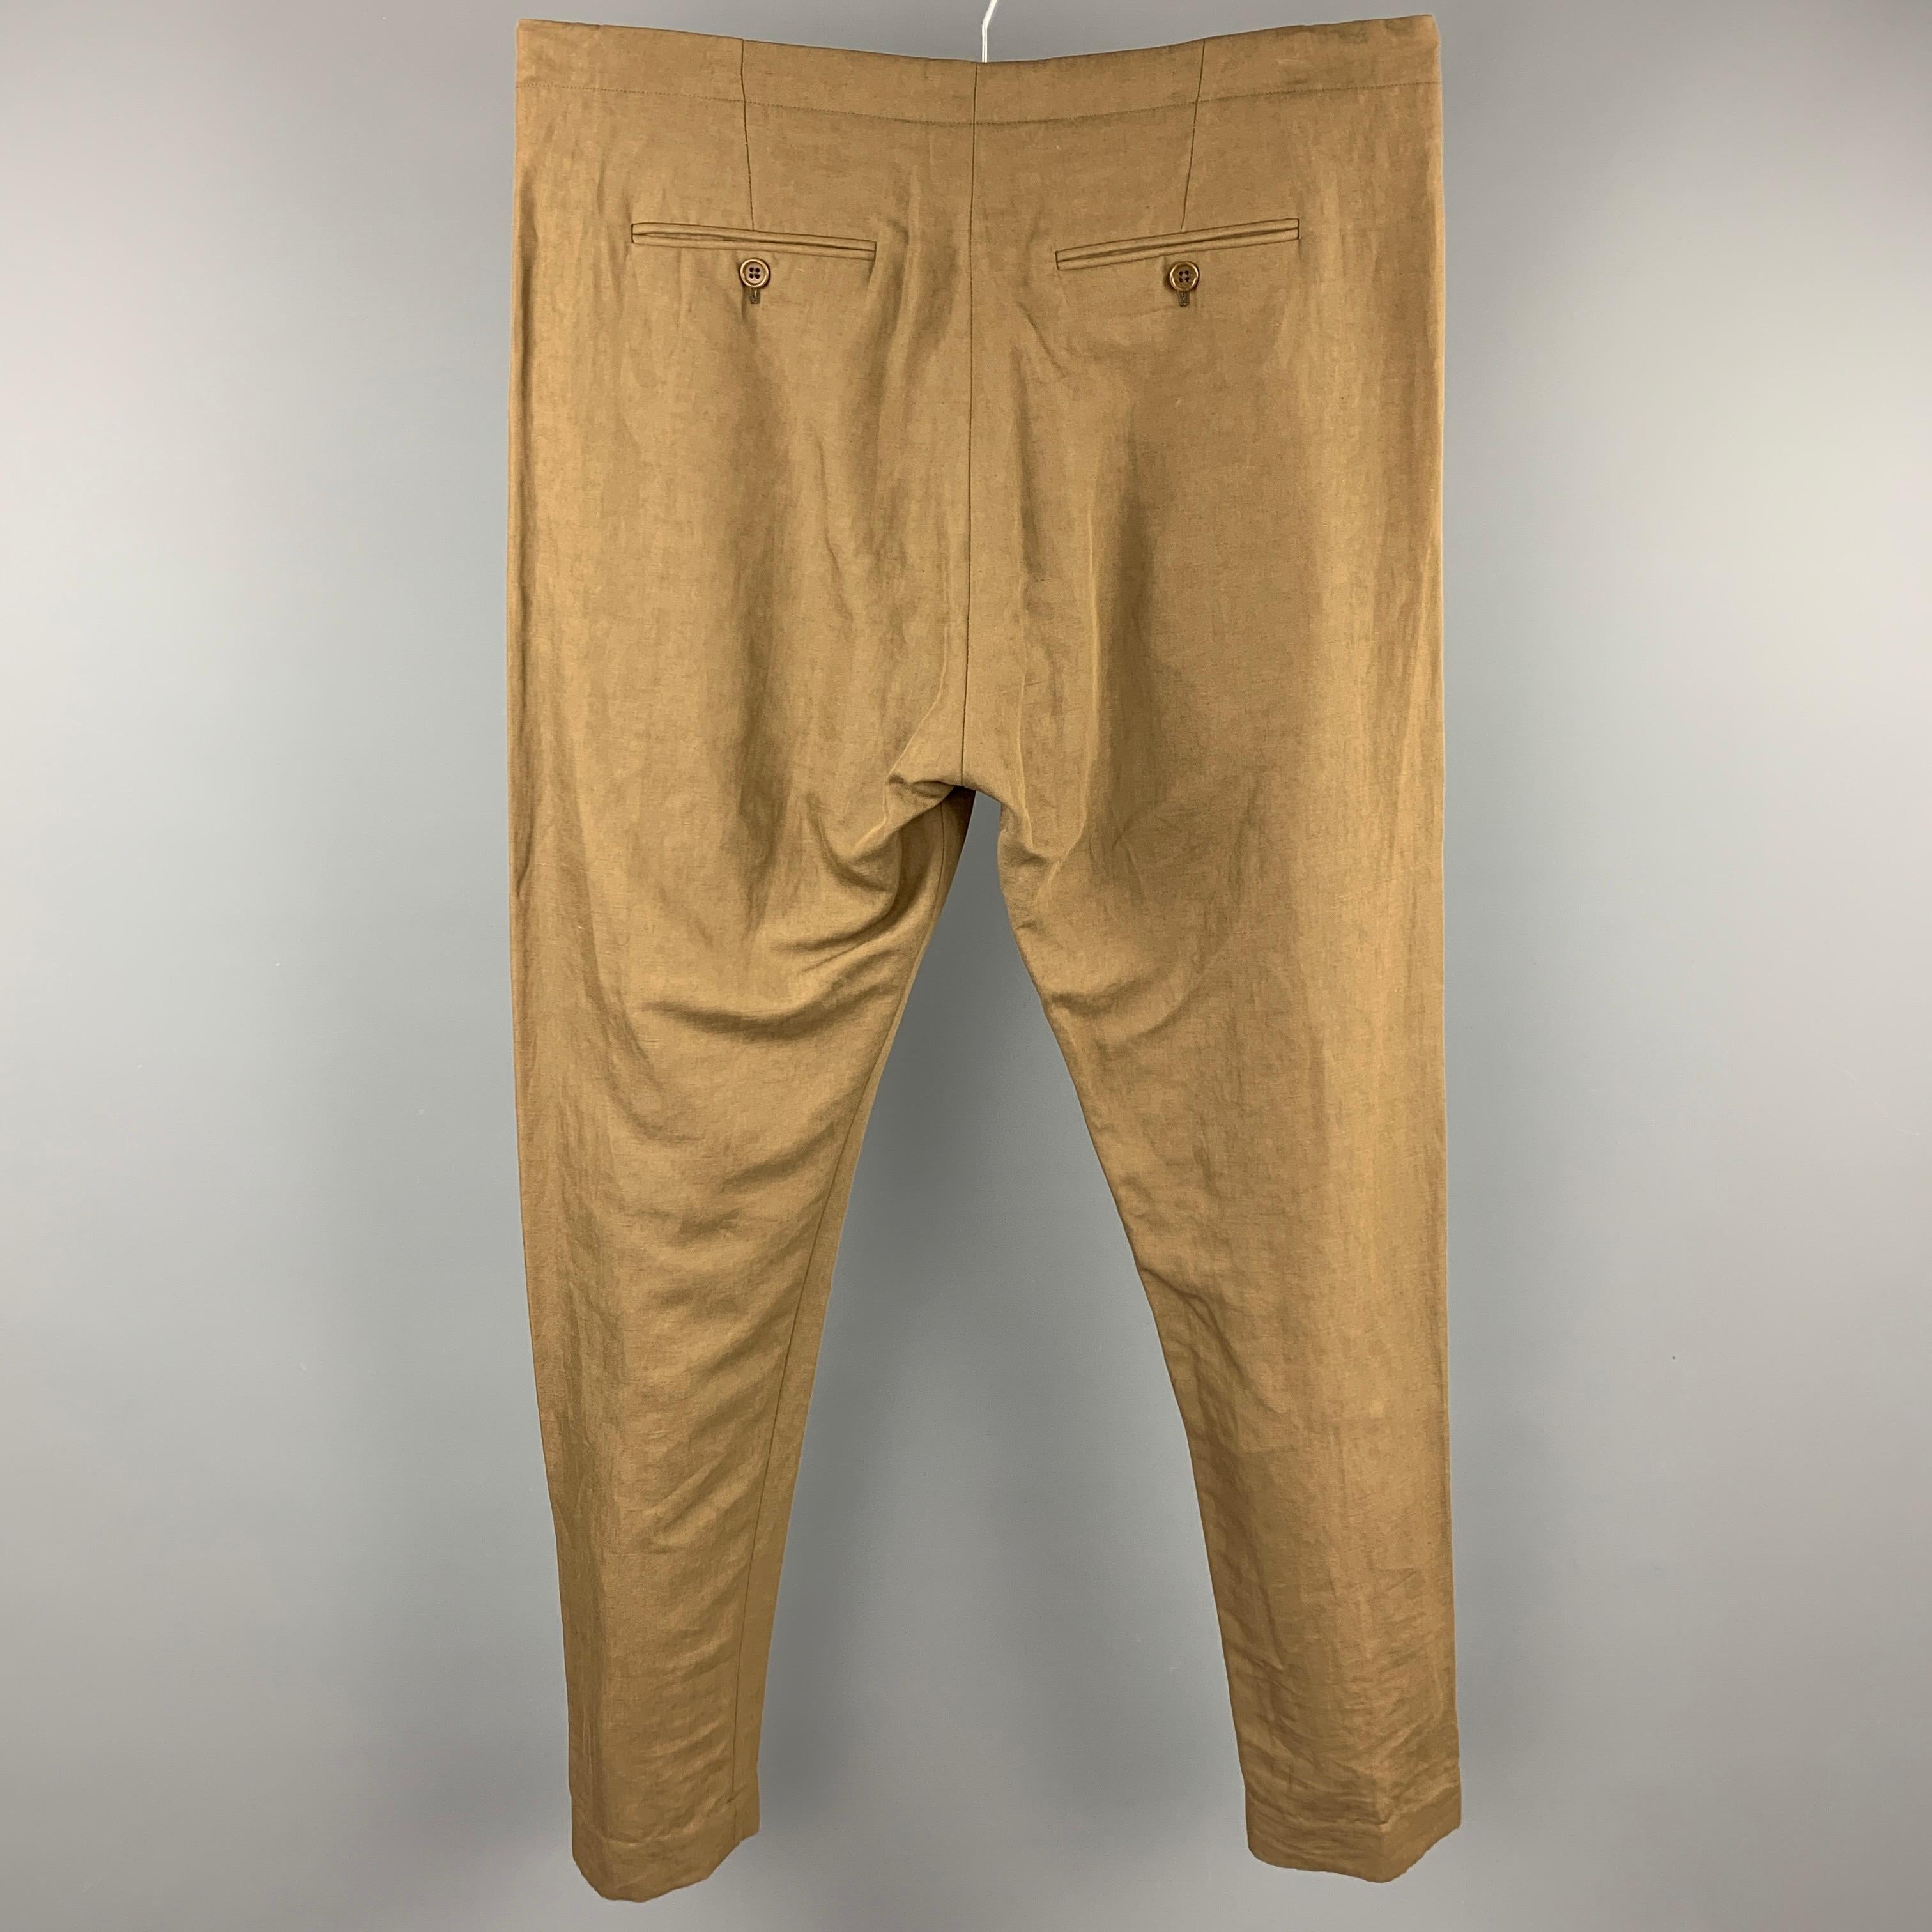 ARJE dress pants comes in a olive cotton / linen featuring a slim fit, slit pockets, and a button fly closure. Made in Italy.

New With Tags. 
Marked: L
Original Retail Price: $320.00

Measurements:

Waist: 36 in.
Rise: 13 in.
Inseam: 31 in. 